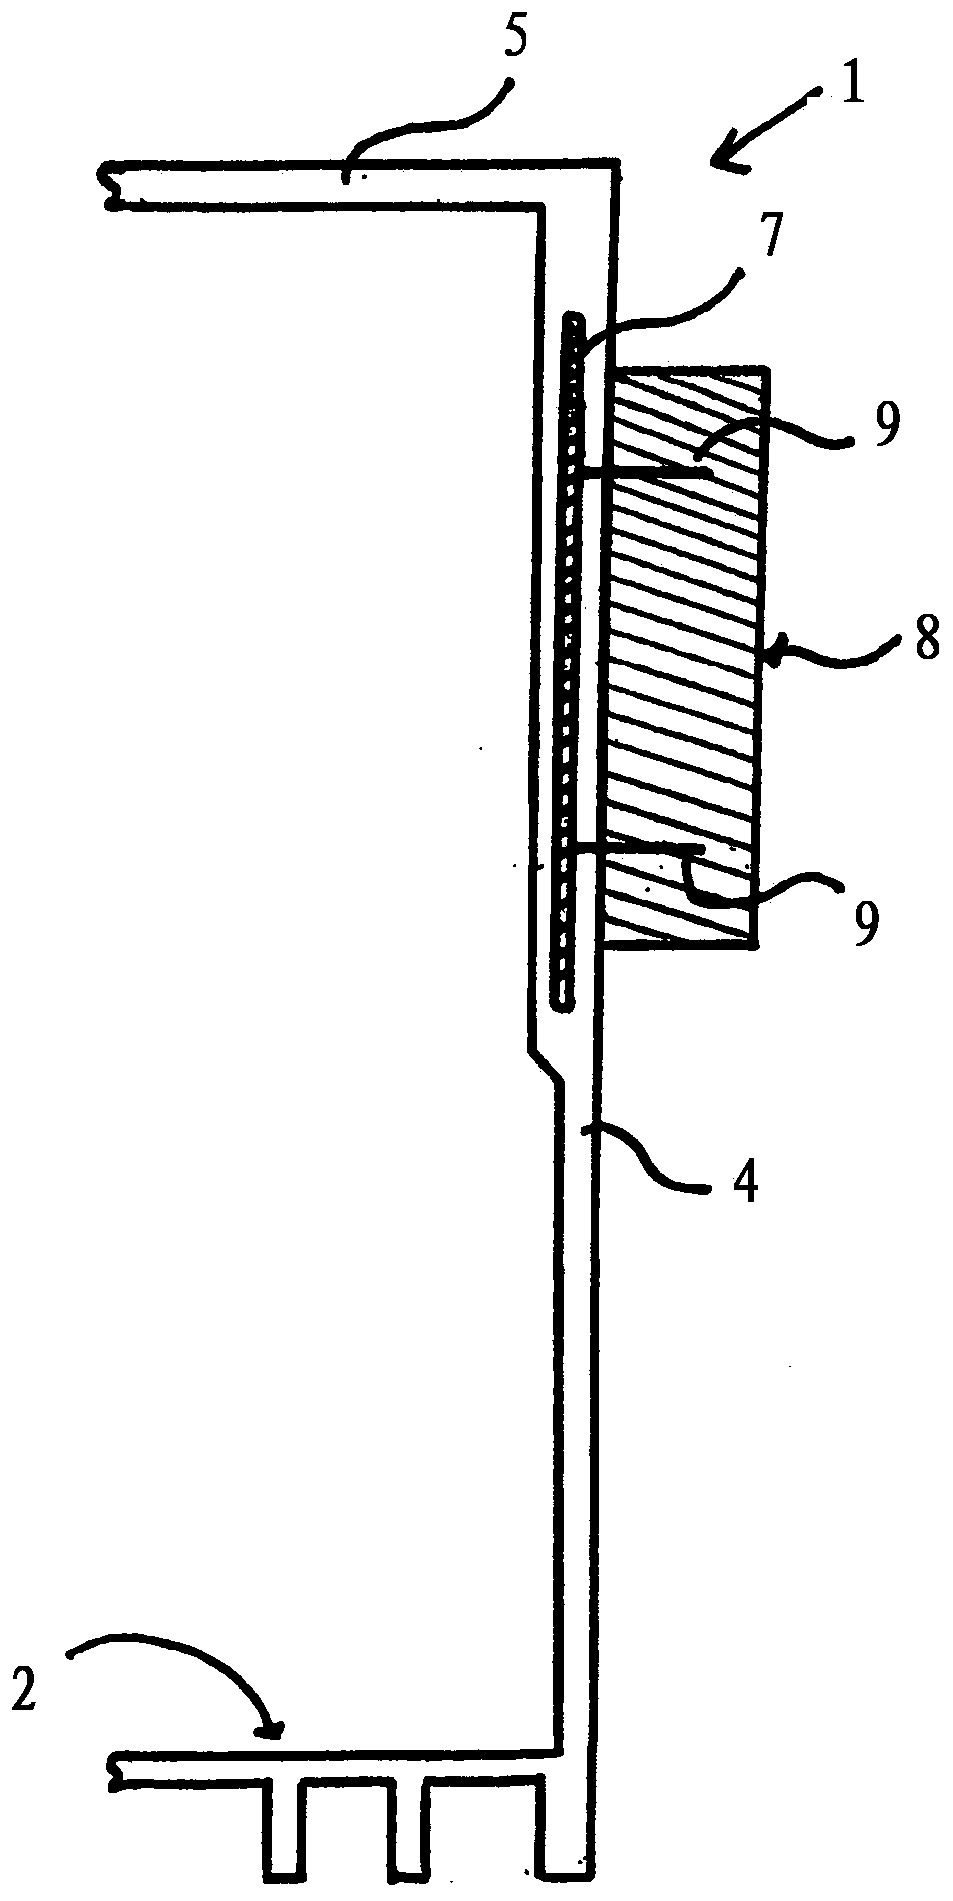 Elevator cab and method for manufacturing same